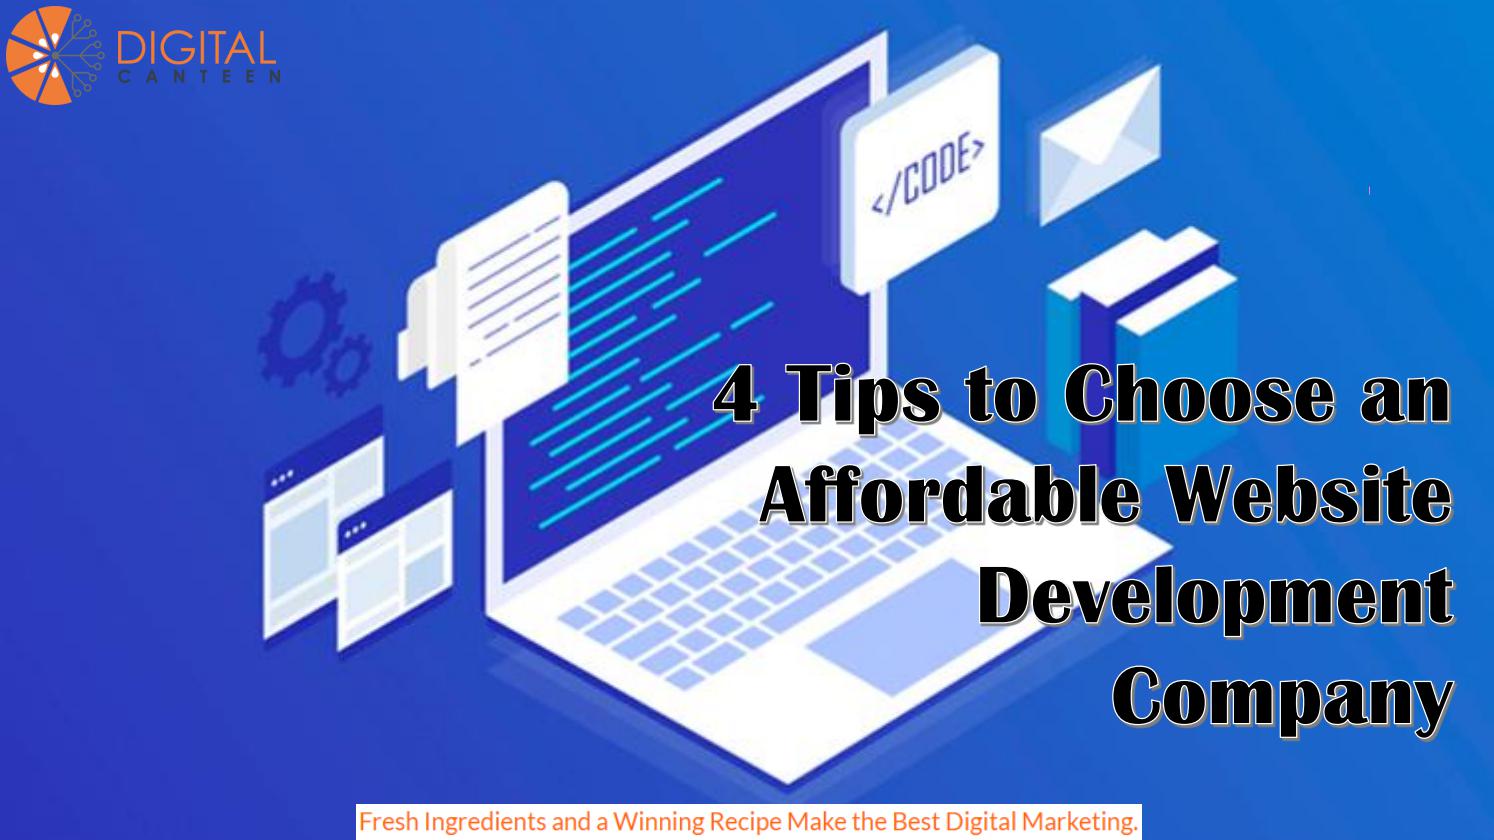 How to choose affordable web development